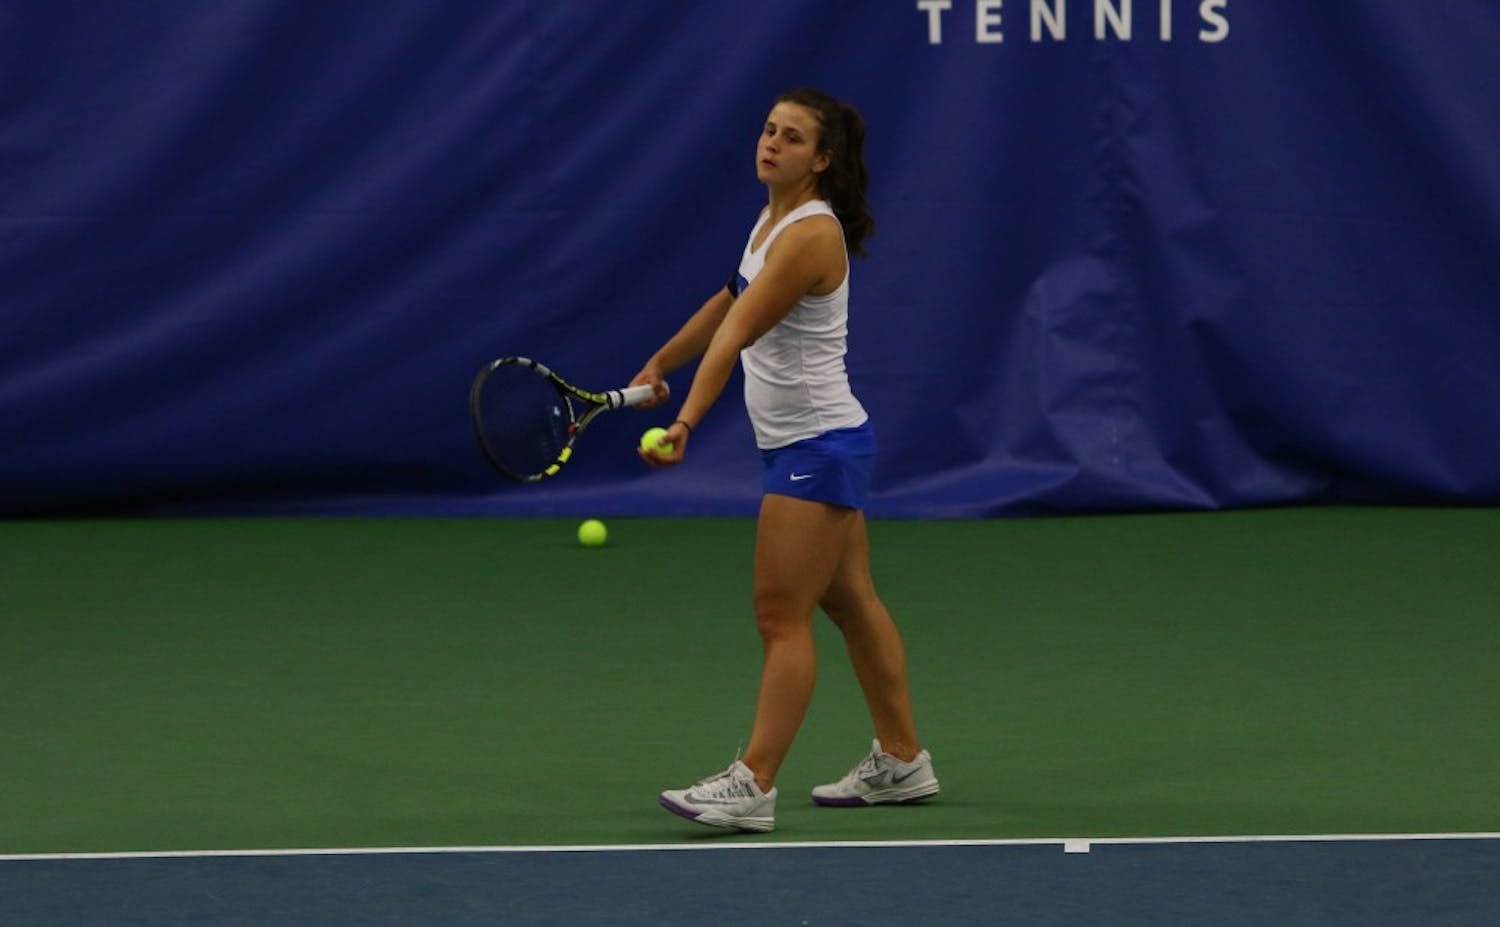 With senior Beatrice Capra out with an illness, sophomore Samantha Harris will look to lead the Blue Devils in the ACC tournament.